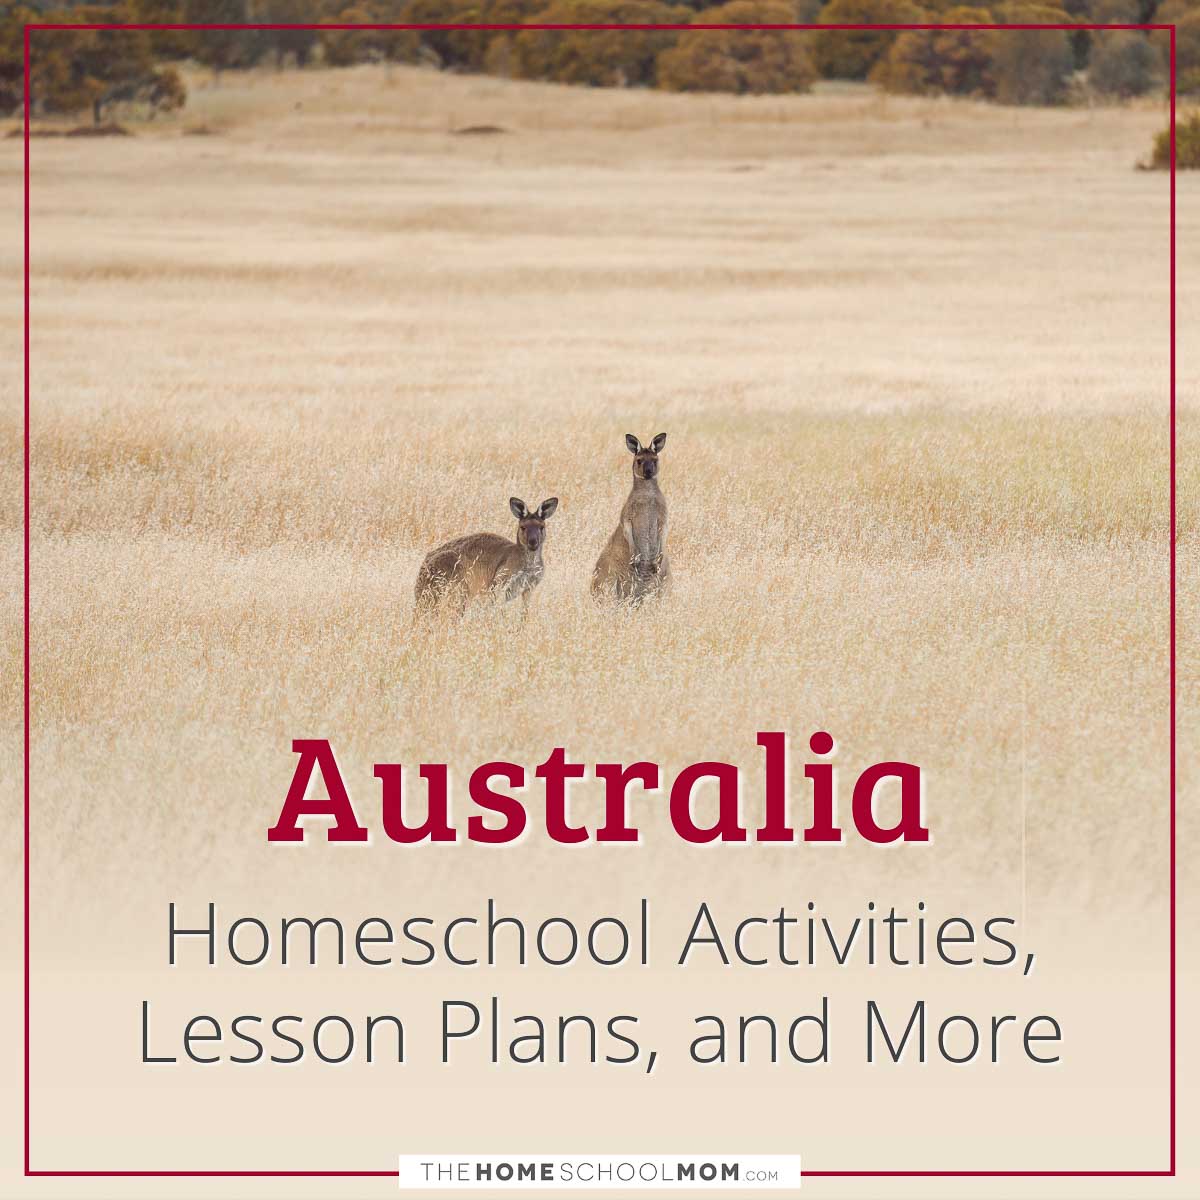 Australia Homeschool Activities, Lesson Plans, and More.